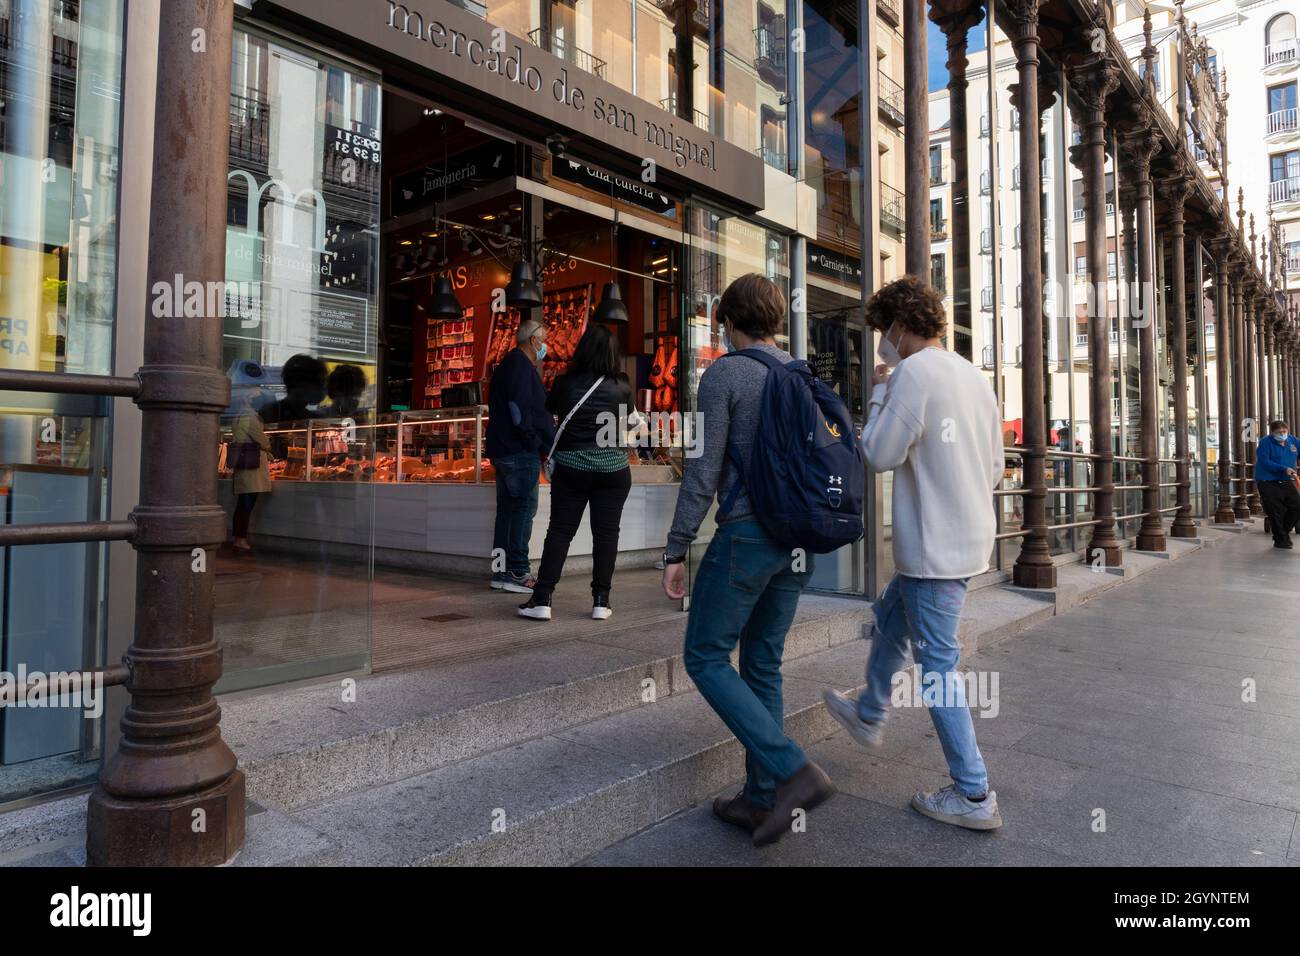 Customers shop at the Madrid’s Mercado de San Miguel in the historic Los Austrias barrio on Wednesday, October 6, 2021. This week, the Health Ministry Stock Photo